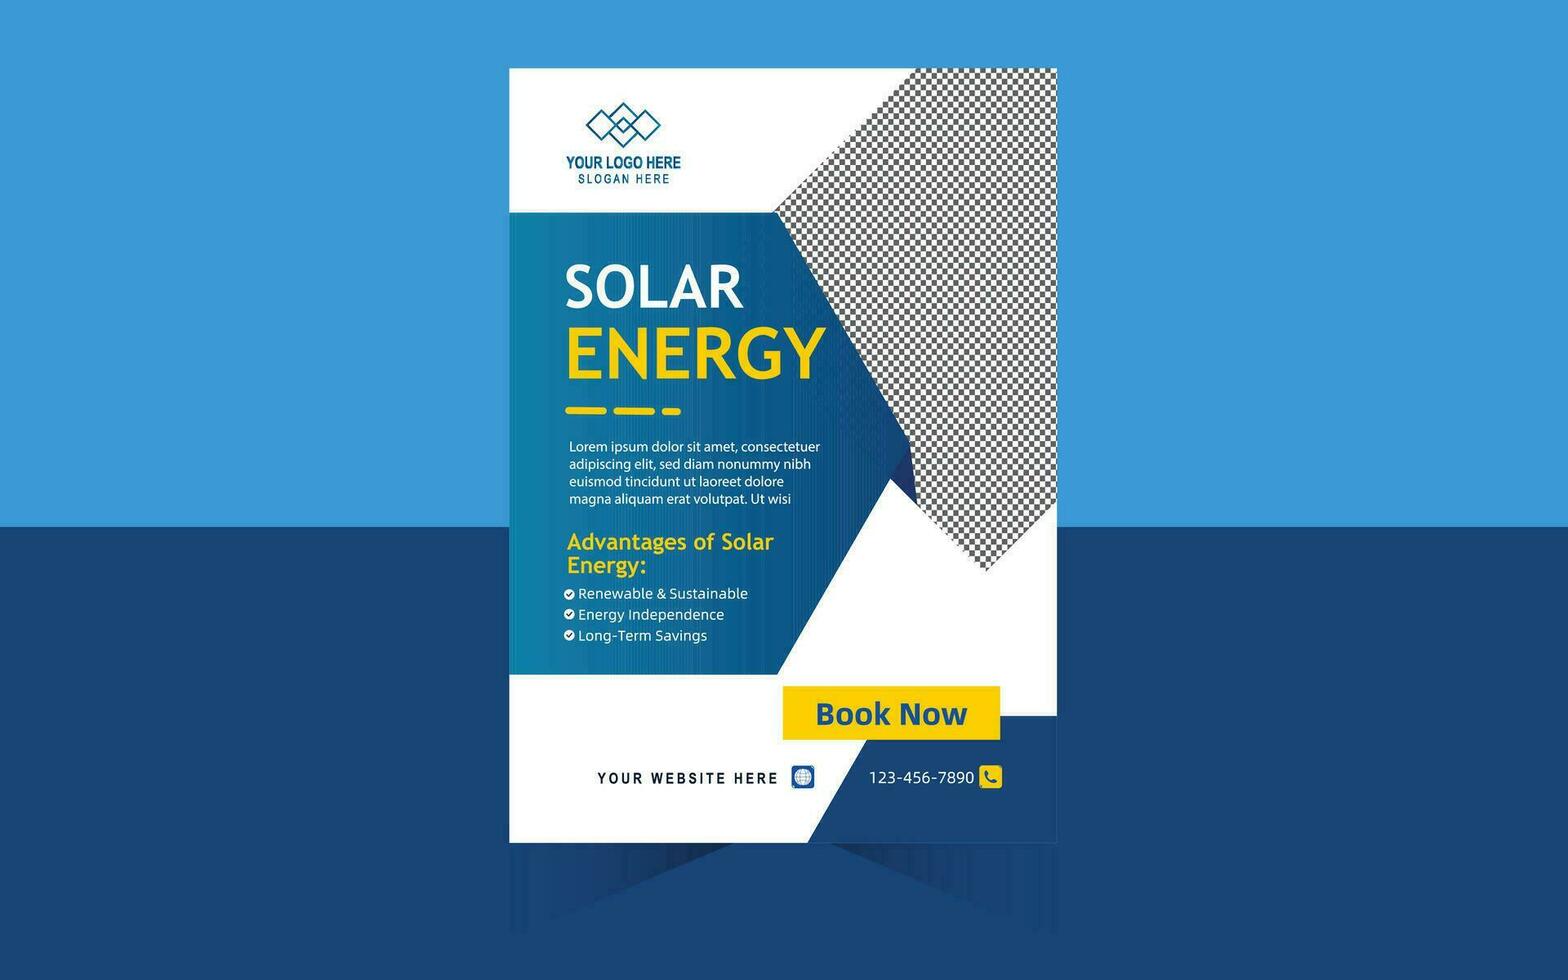 Green energy flyer templates and solar panel business poster layout design vector